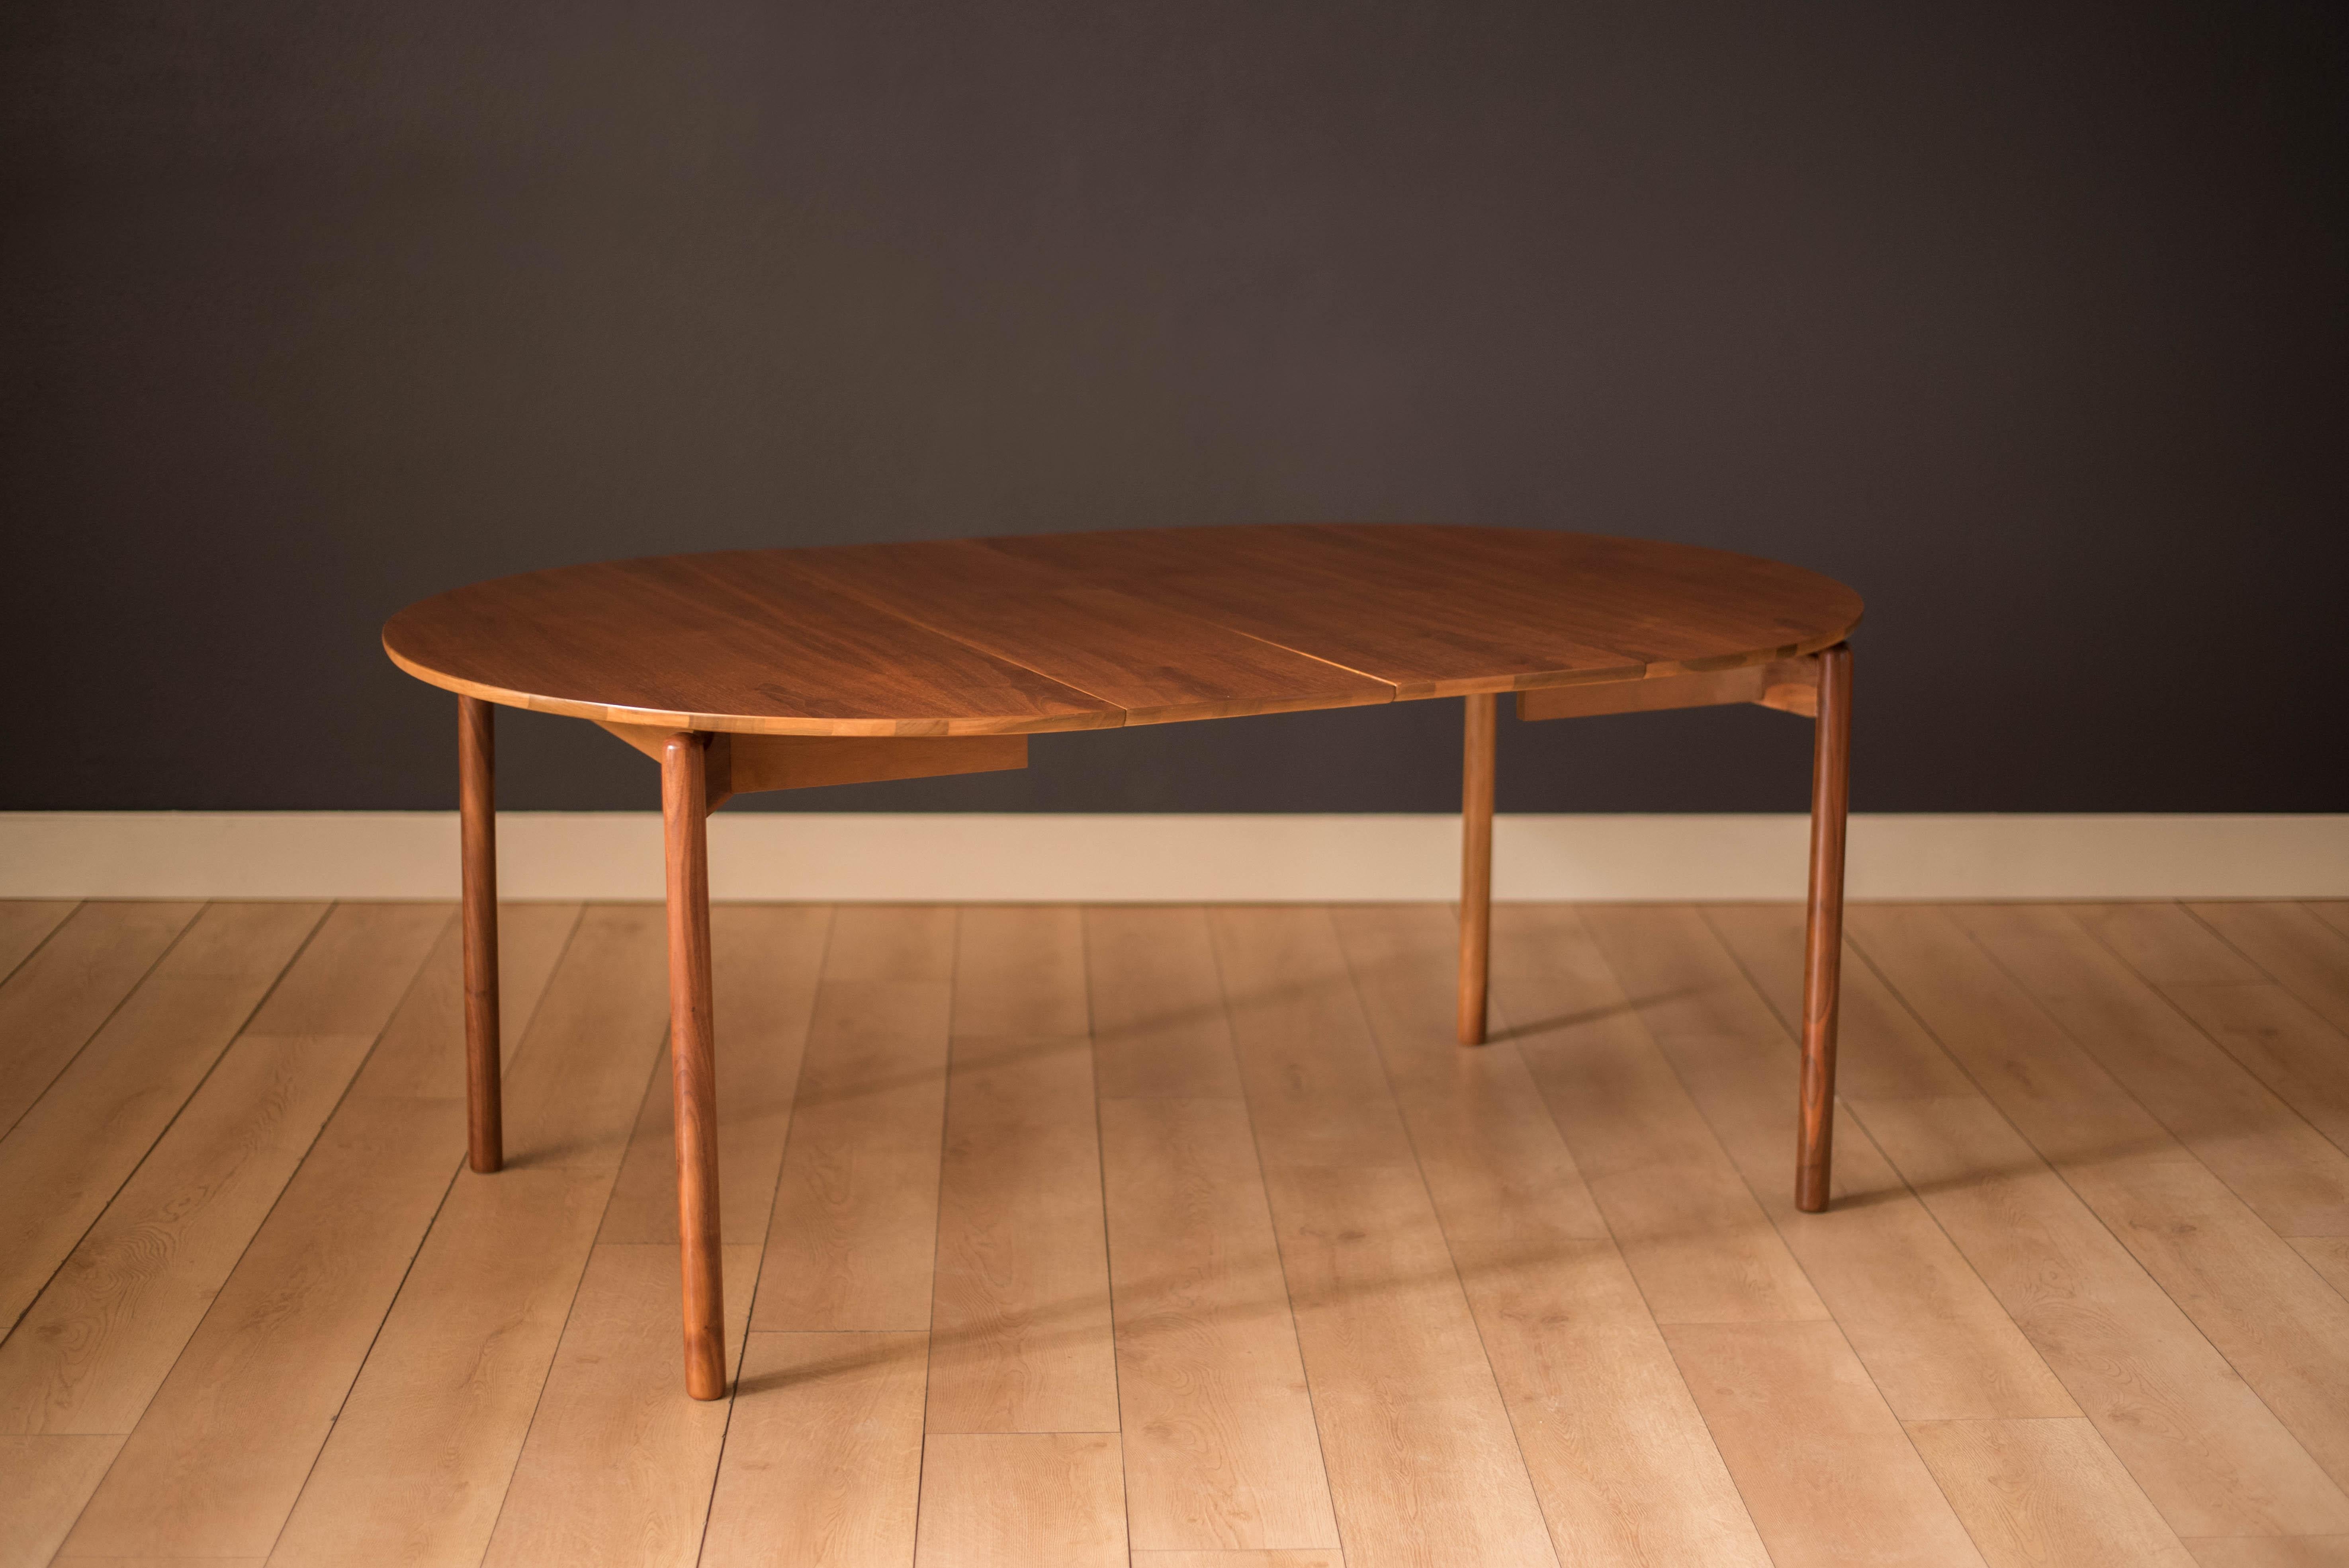 Vintage extendable dining table designed by Greta Magnusson-Grossman for Glenn of California. Features a walnut round table top suspended by a sculpted floating base design. This piece extends by using one or two leaves allowing more space for